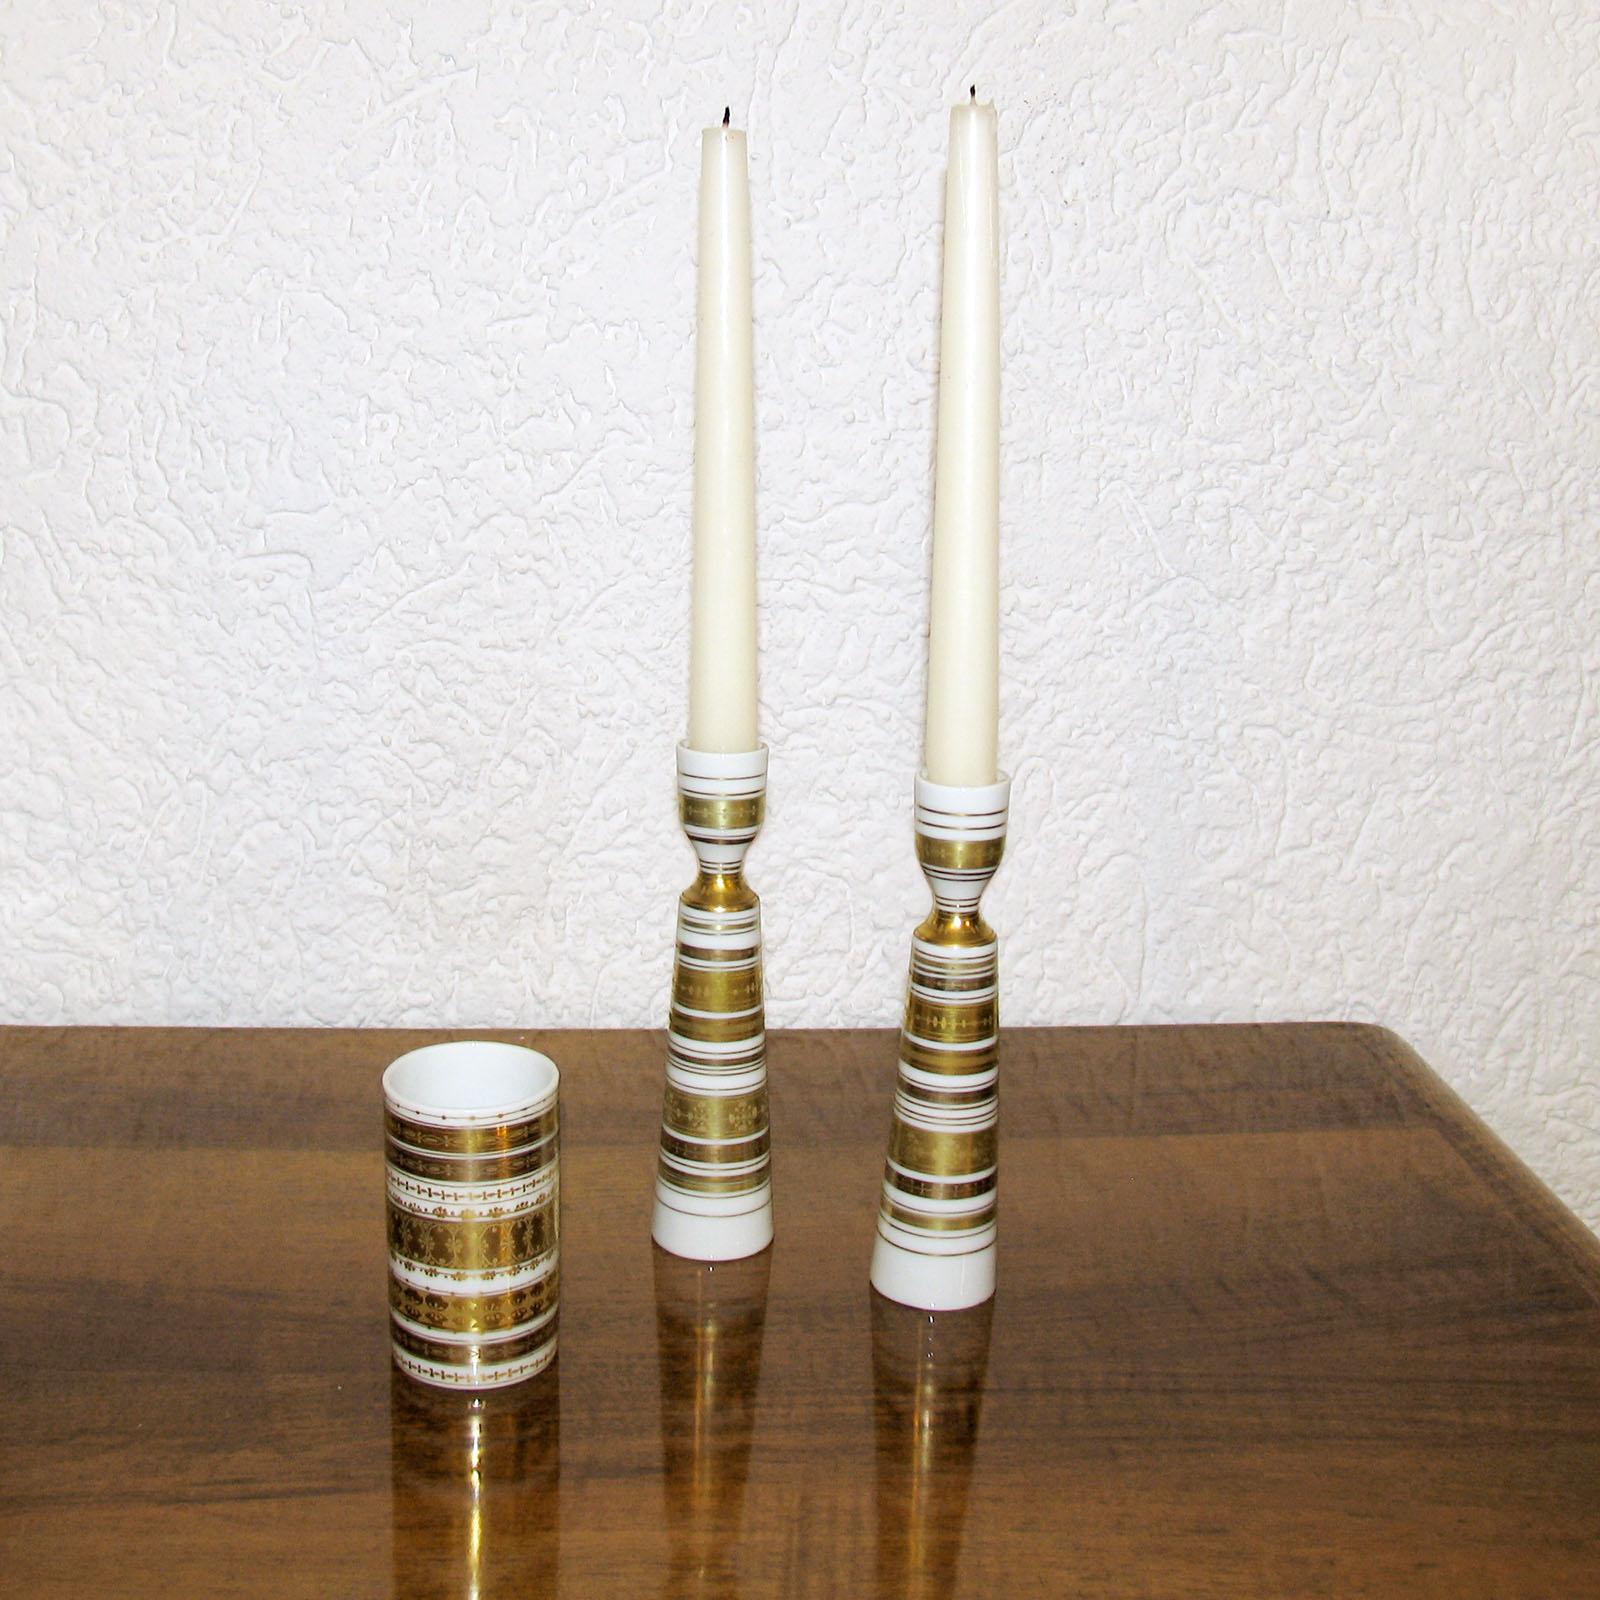 Mid-Century Modern, Rosenthal Porcelain candlesticks and vase by Bjorn Wiinblad.
Bjorn Wiinblad for Rosenthal studio-linie, quatre couleurs, Germany, 1980s
Pair of candlesticks made of porcelain and a small vase, decorated in gold, 4 shades of